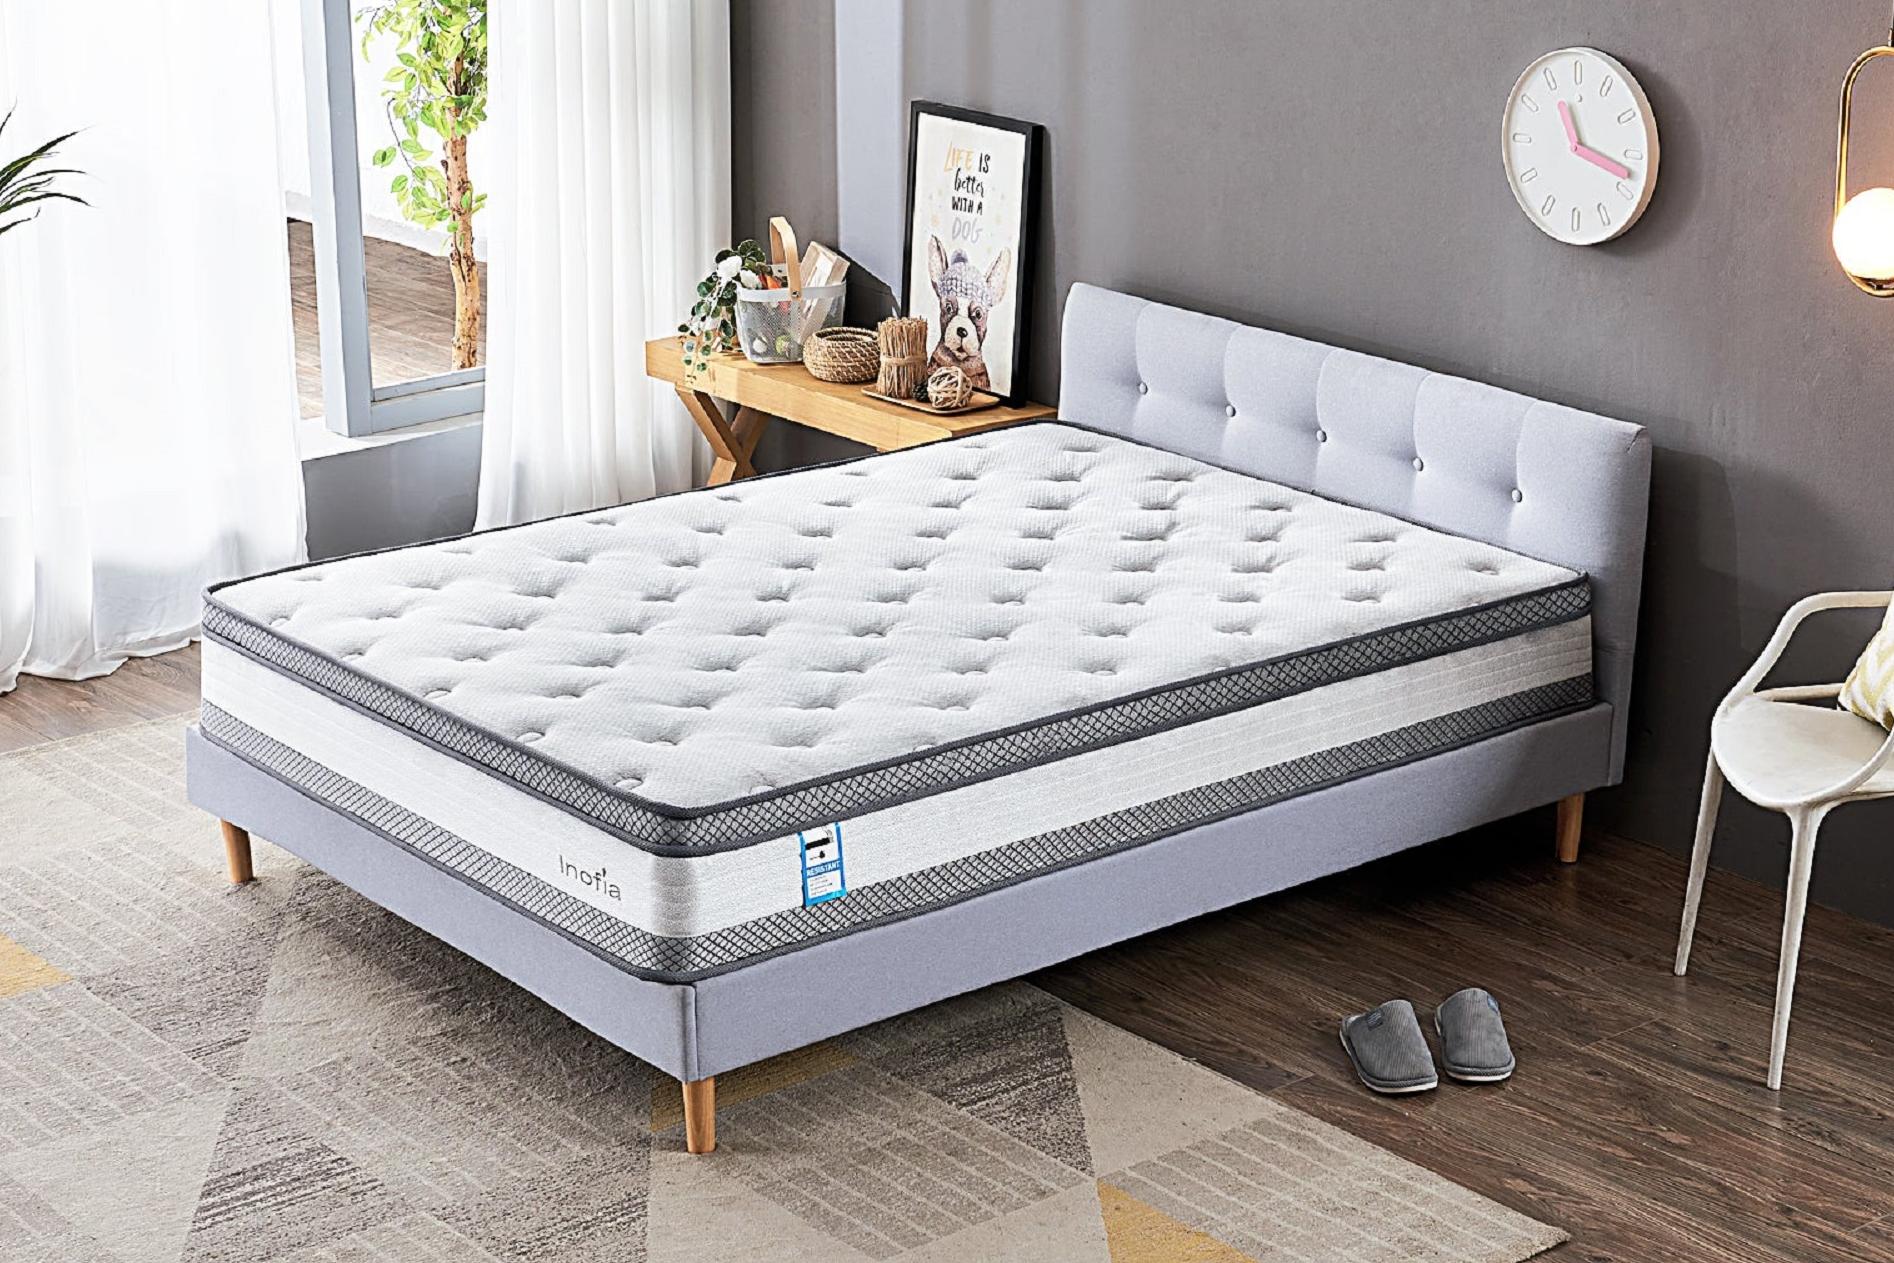 What are the advantages and disadvantages of Hybrid Mattresses in 2022?